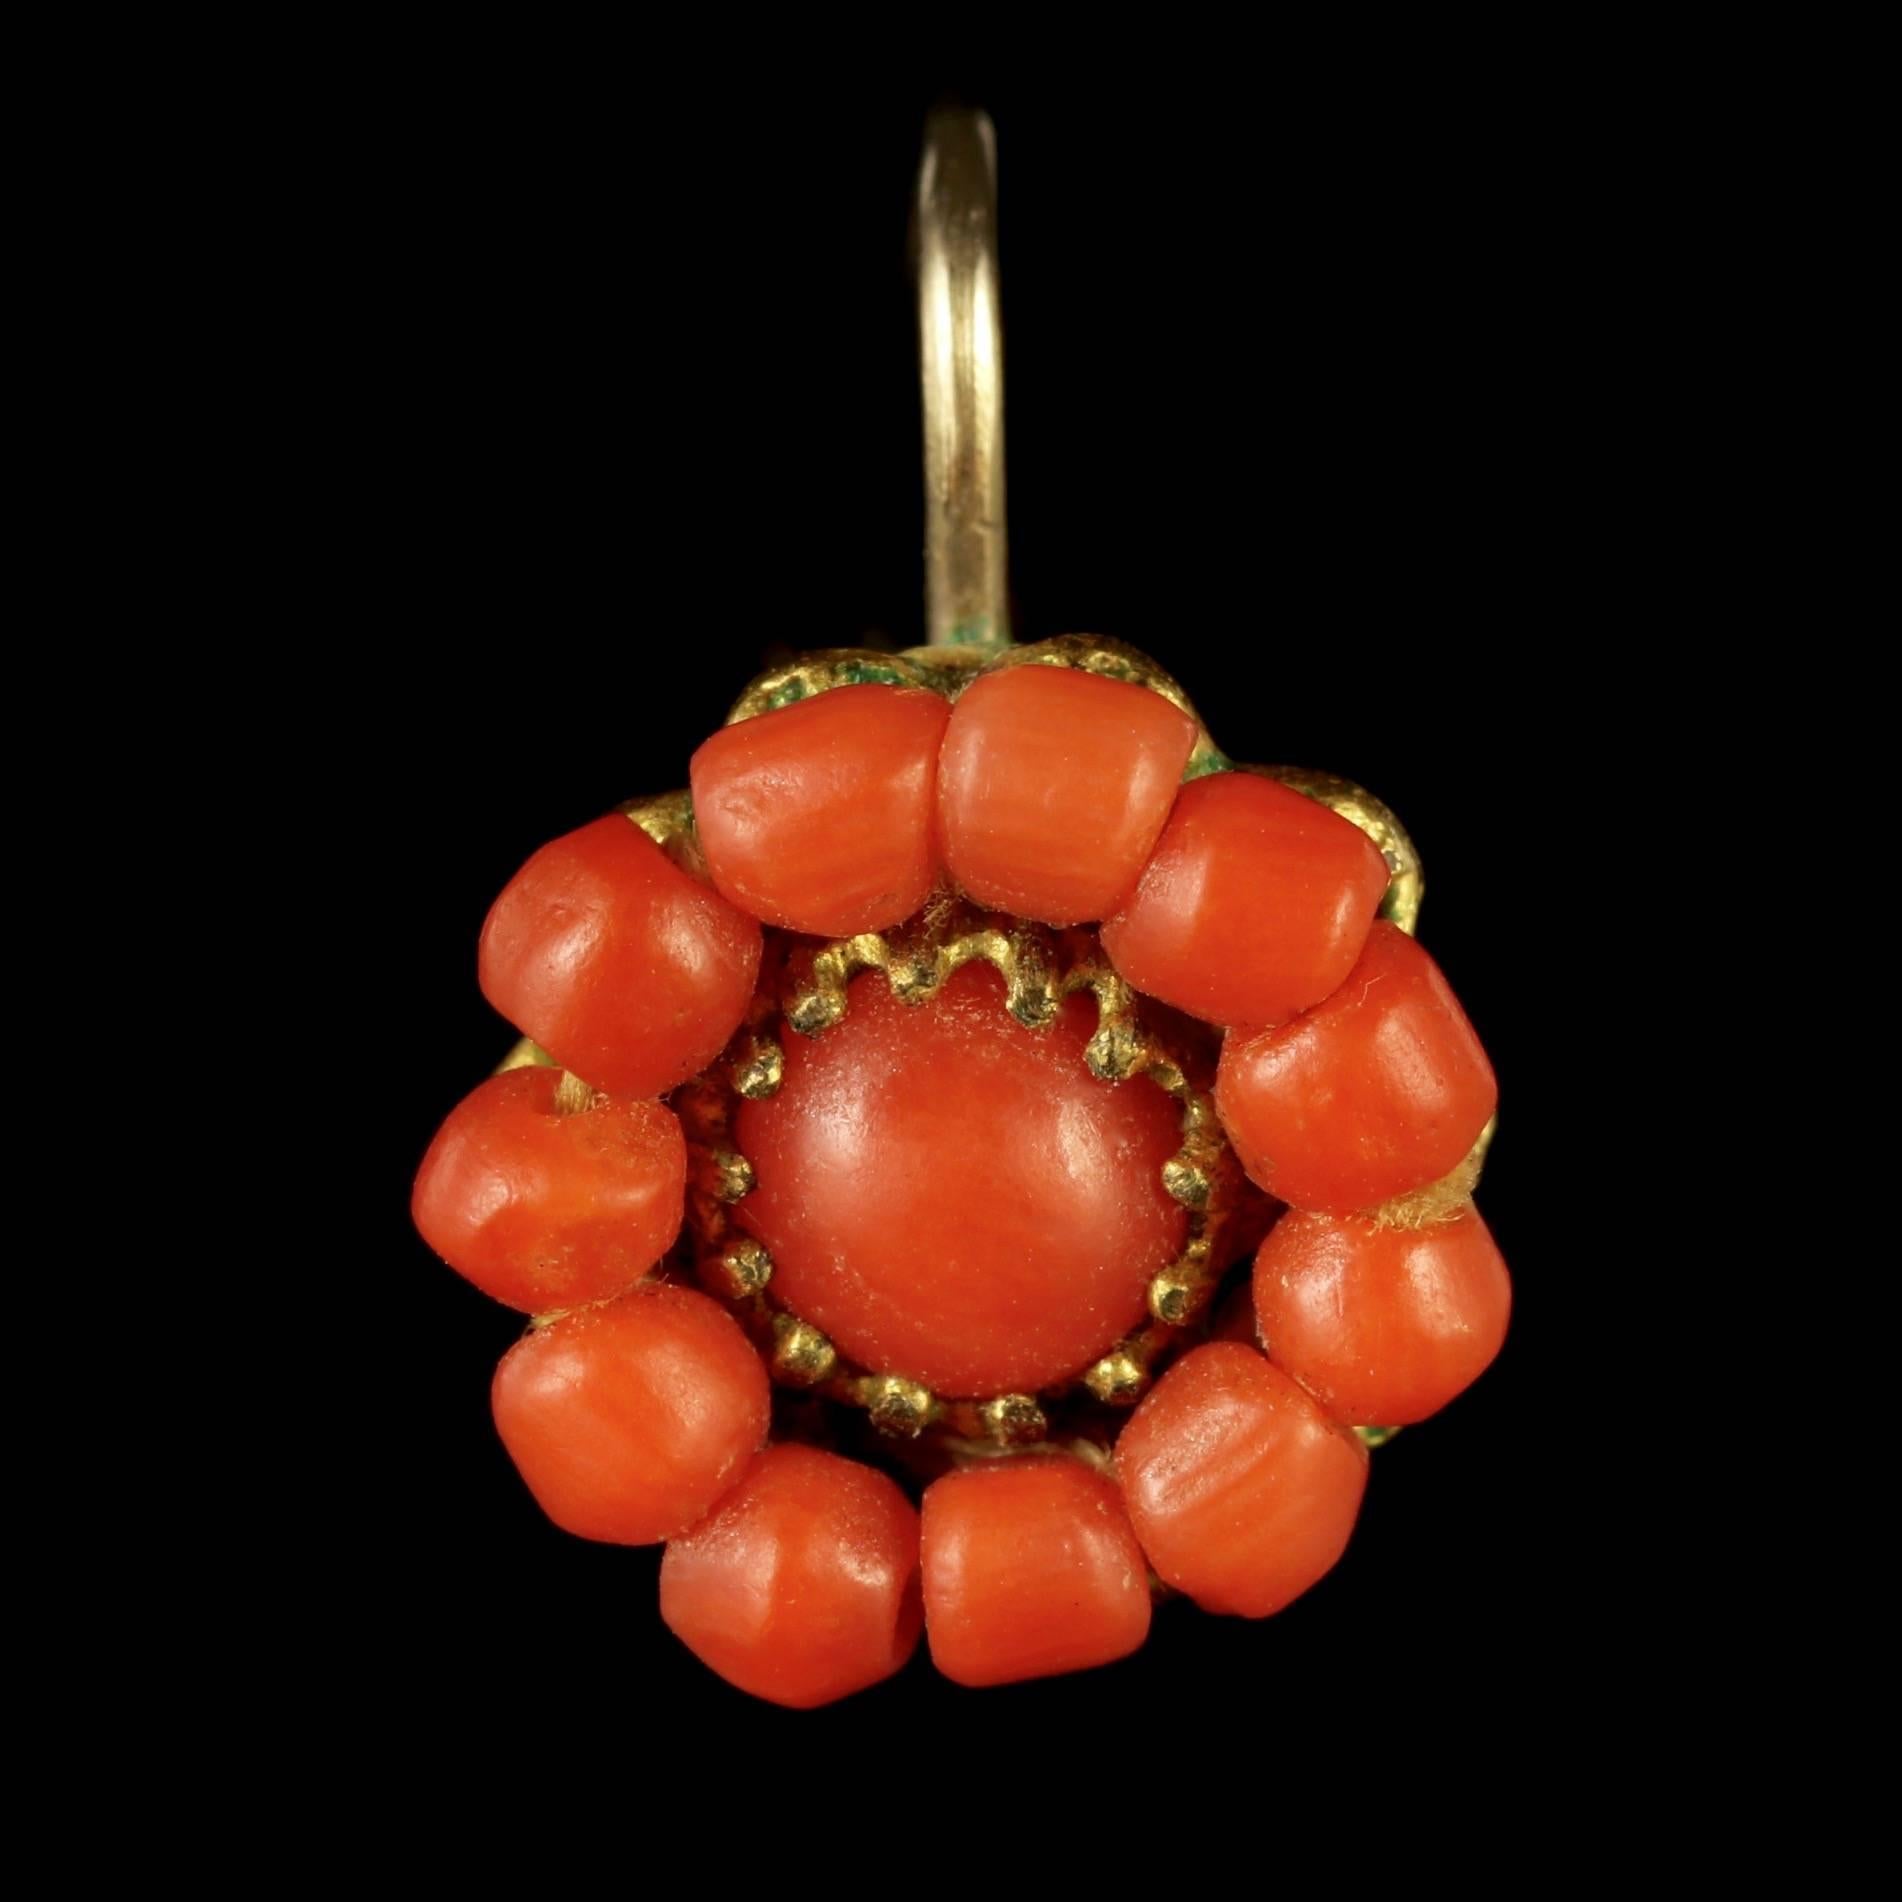 To read more please click continue reading below-

These beautiful antique Victorian gilded 18ct Gold Coral earrings are Circa 1880.

The wonderful little earrings are adorned with fabulous fiery orange Coral stones arranged in a flower shaped